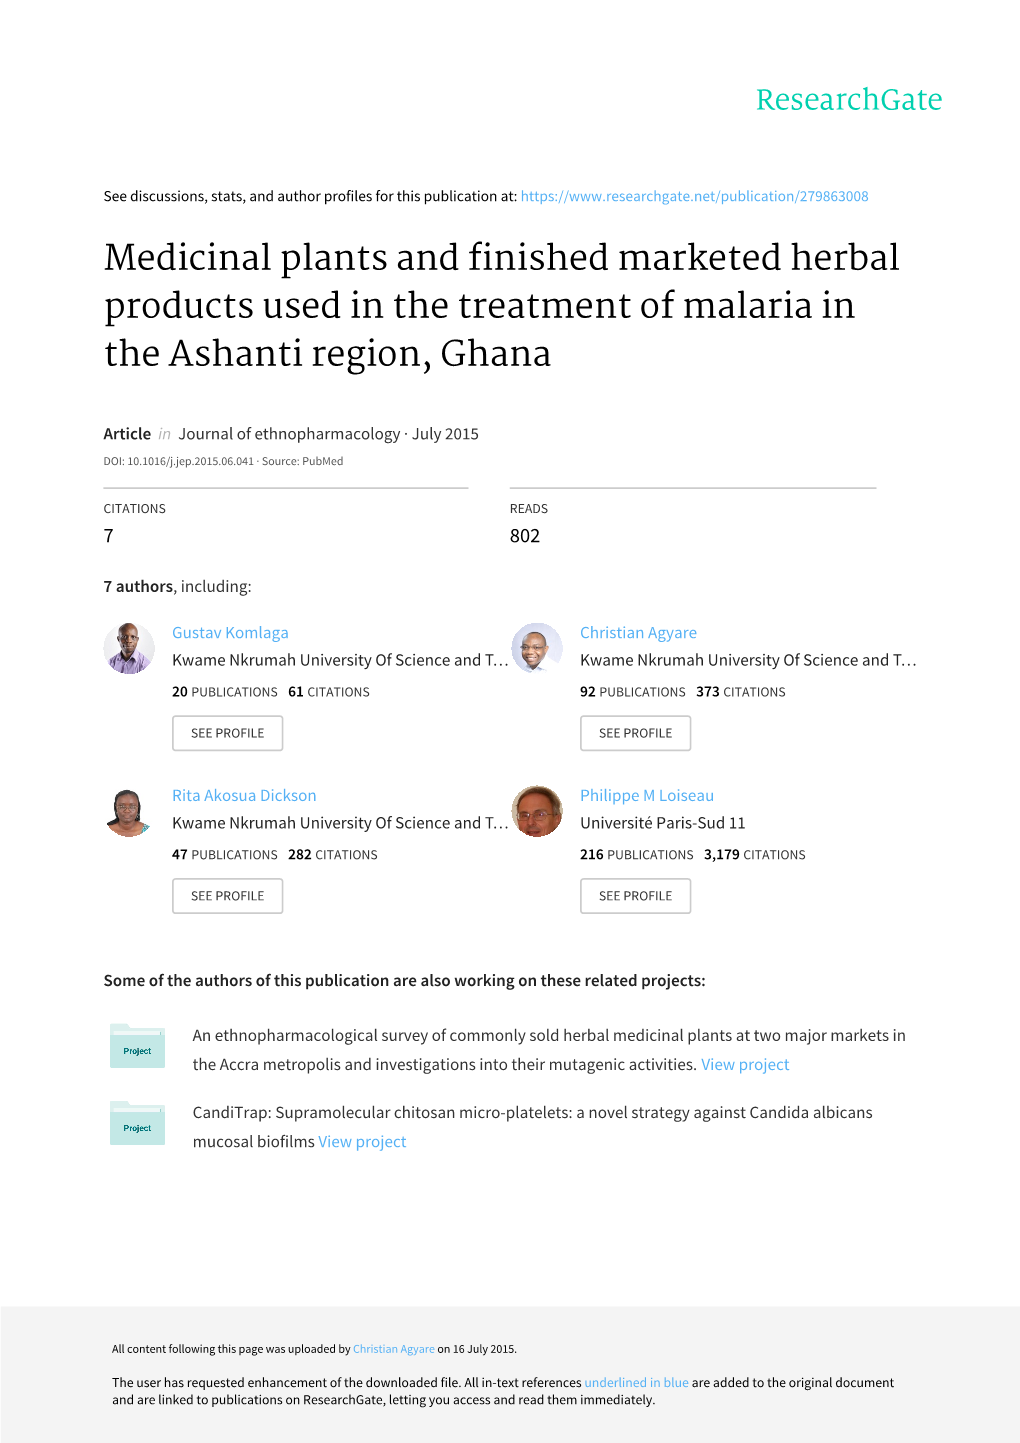 Medicinal Plants and Finished Marketed Herbal Products Used in the Treatment of Malaria in the Ashanti Region, Ghana